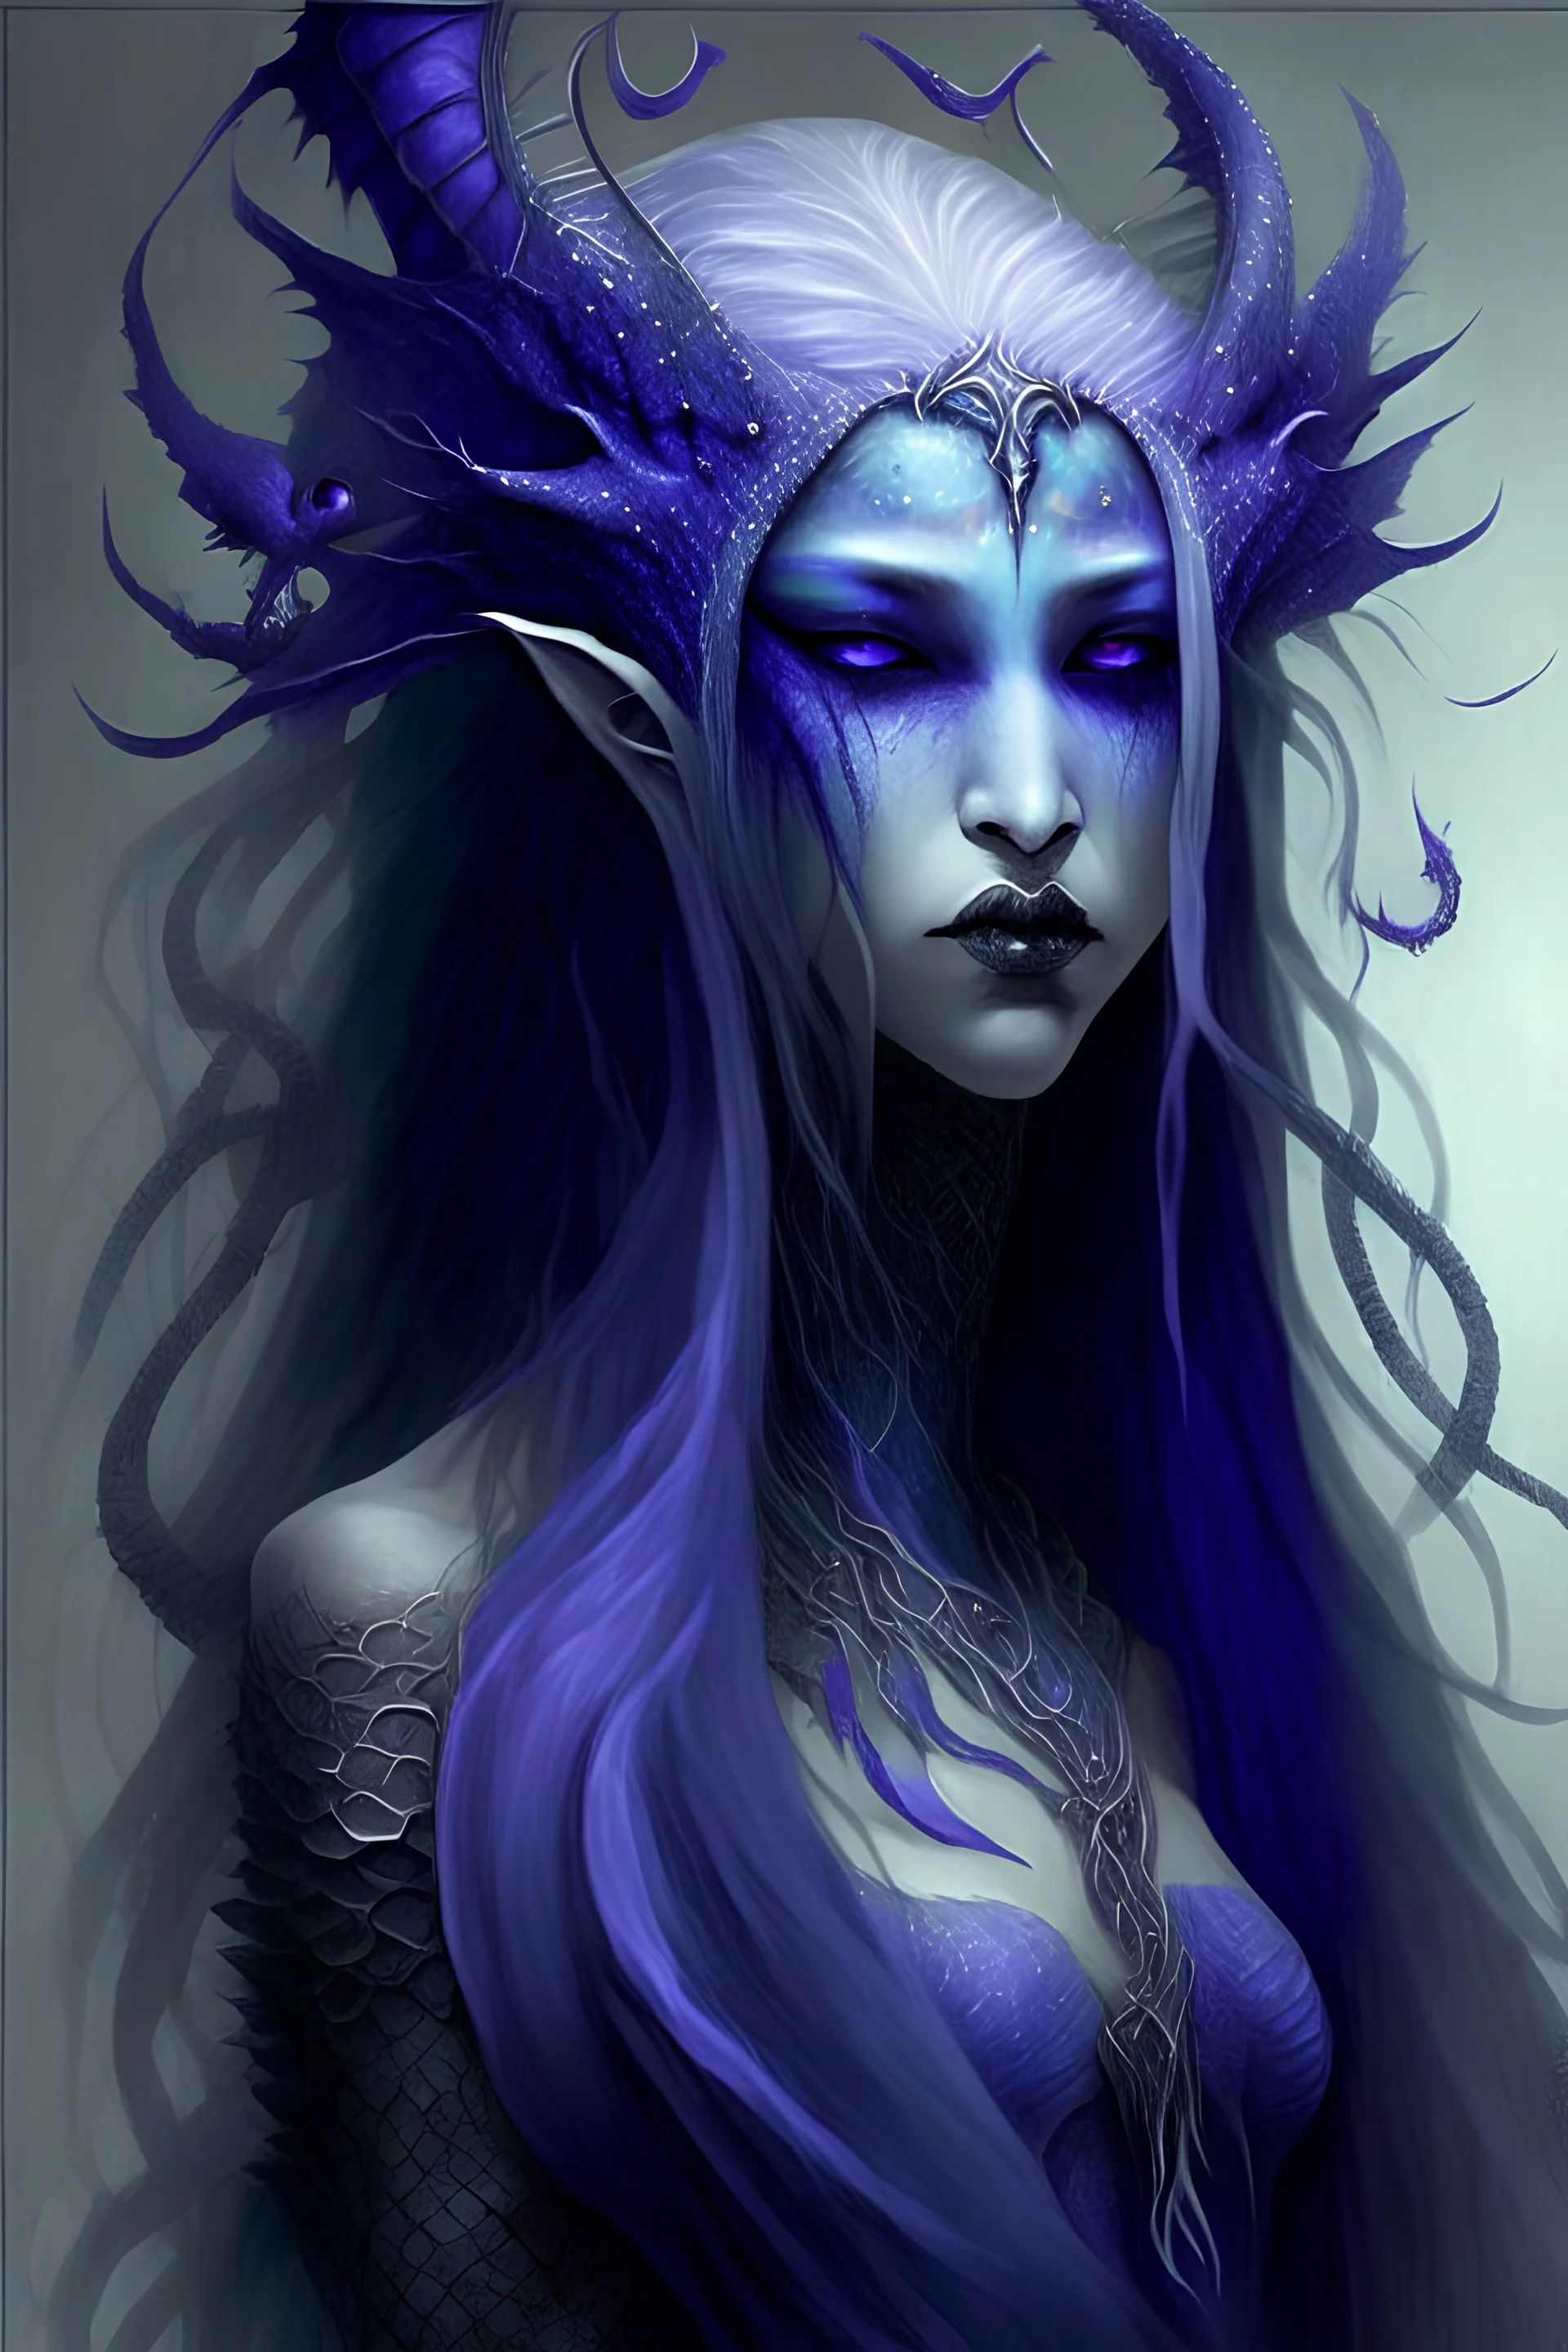 Imaginary creature, a female queen, I have no legs, she has a blue ray tail. And long purple hair. And the skin of gray scales. A jewel in the middle of her forehead, she has only three fingers and sharp claws